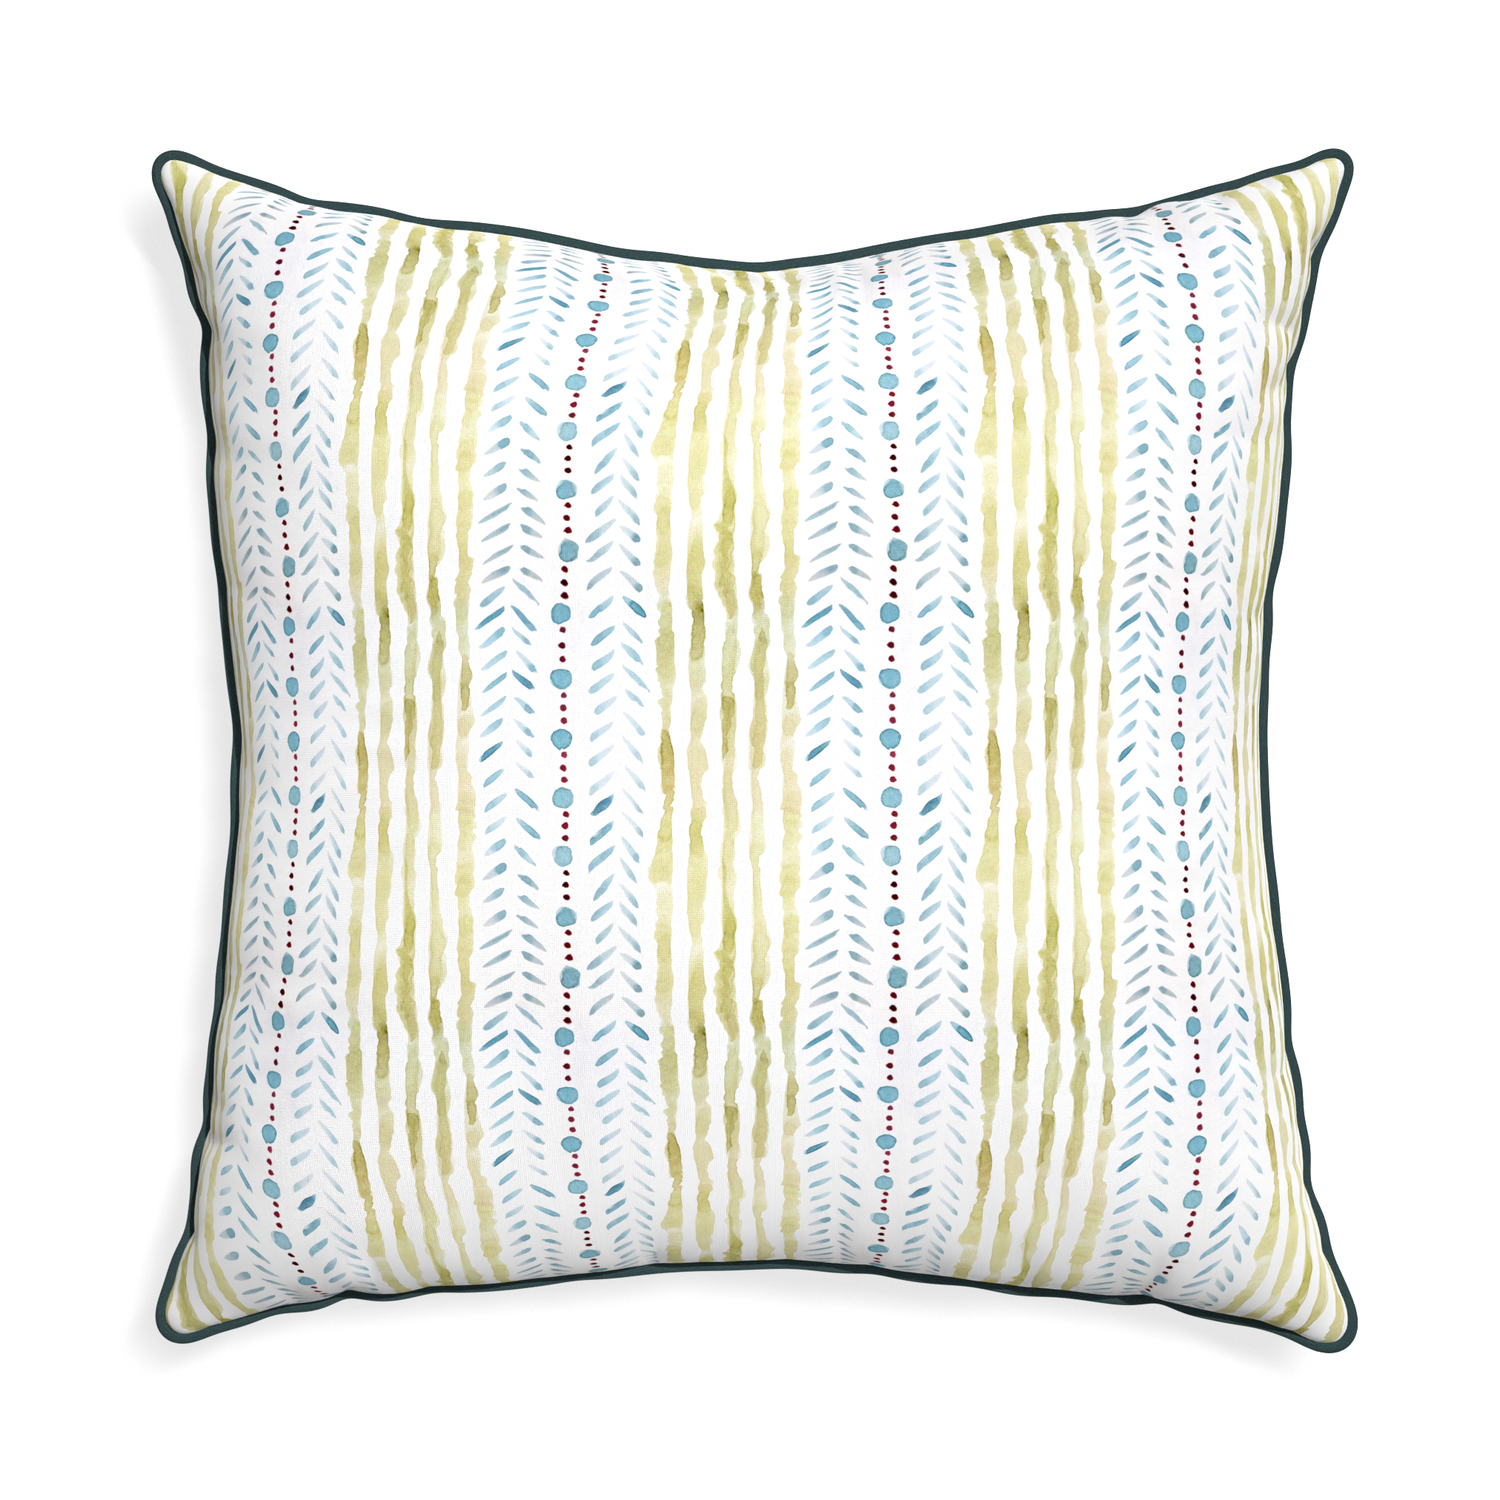 Euro-sham julia custom blue & green stripedpillow with p piping on white background